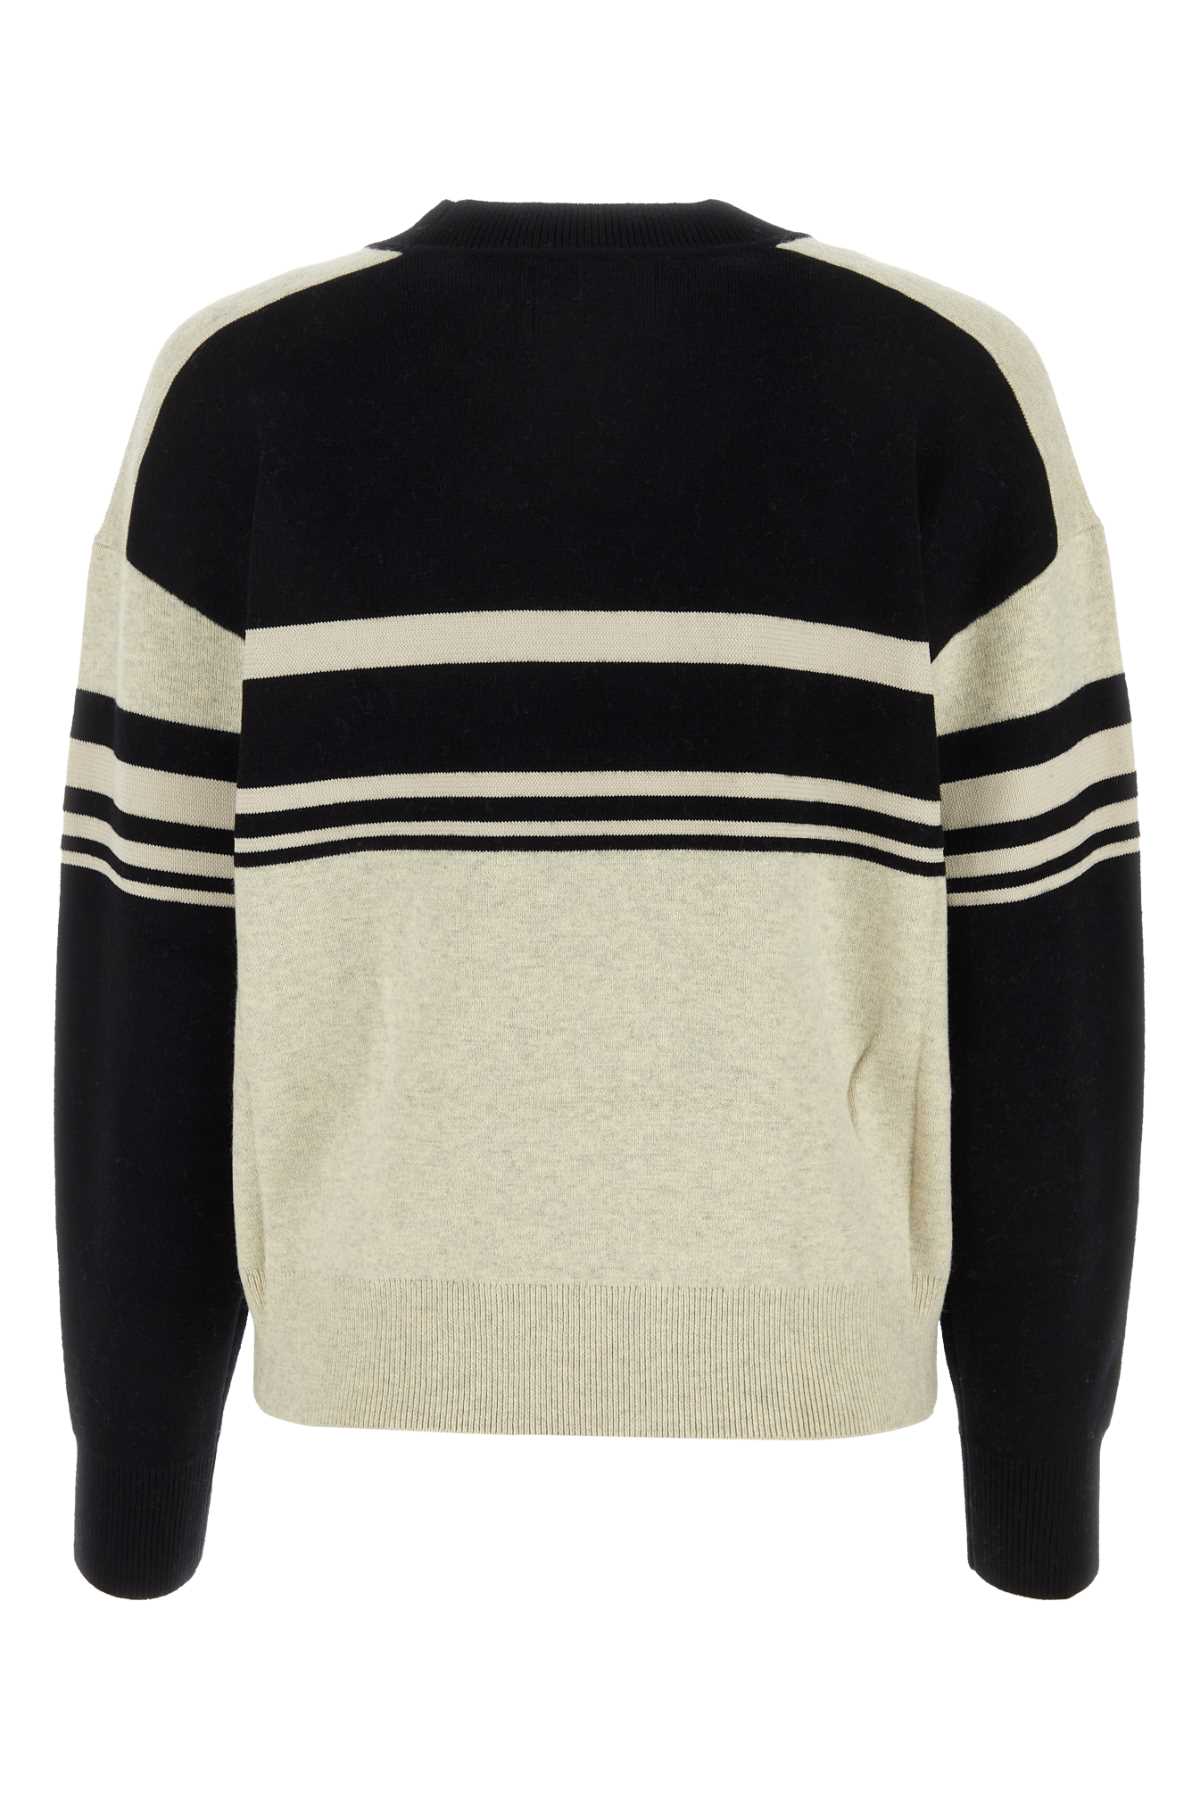 Marant Etoile Two-tone Stretch Cotton Blend Callie Sweater In Black